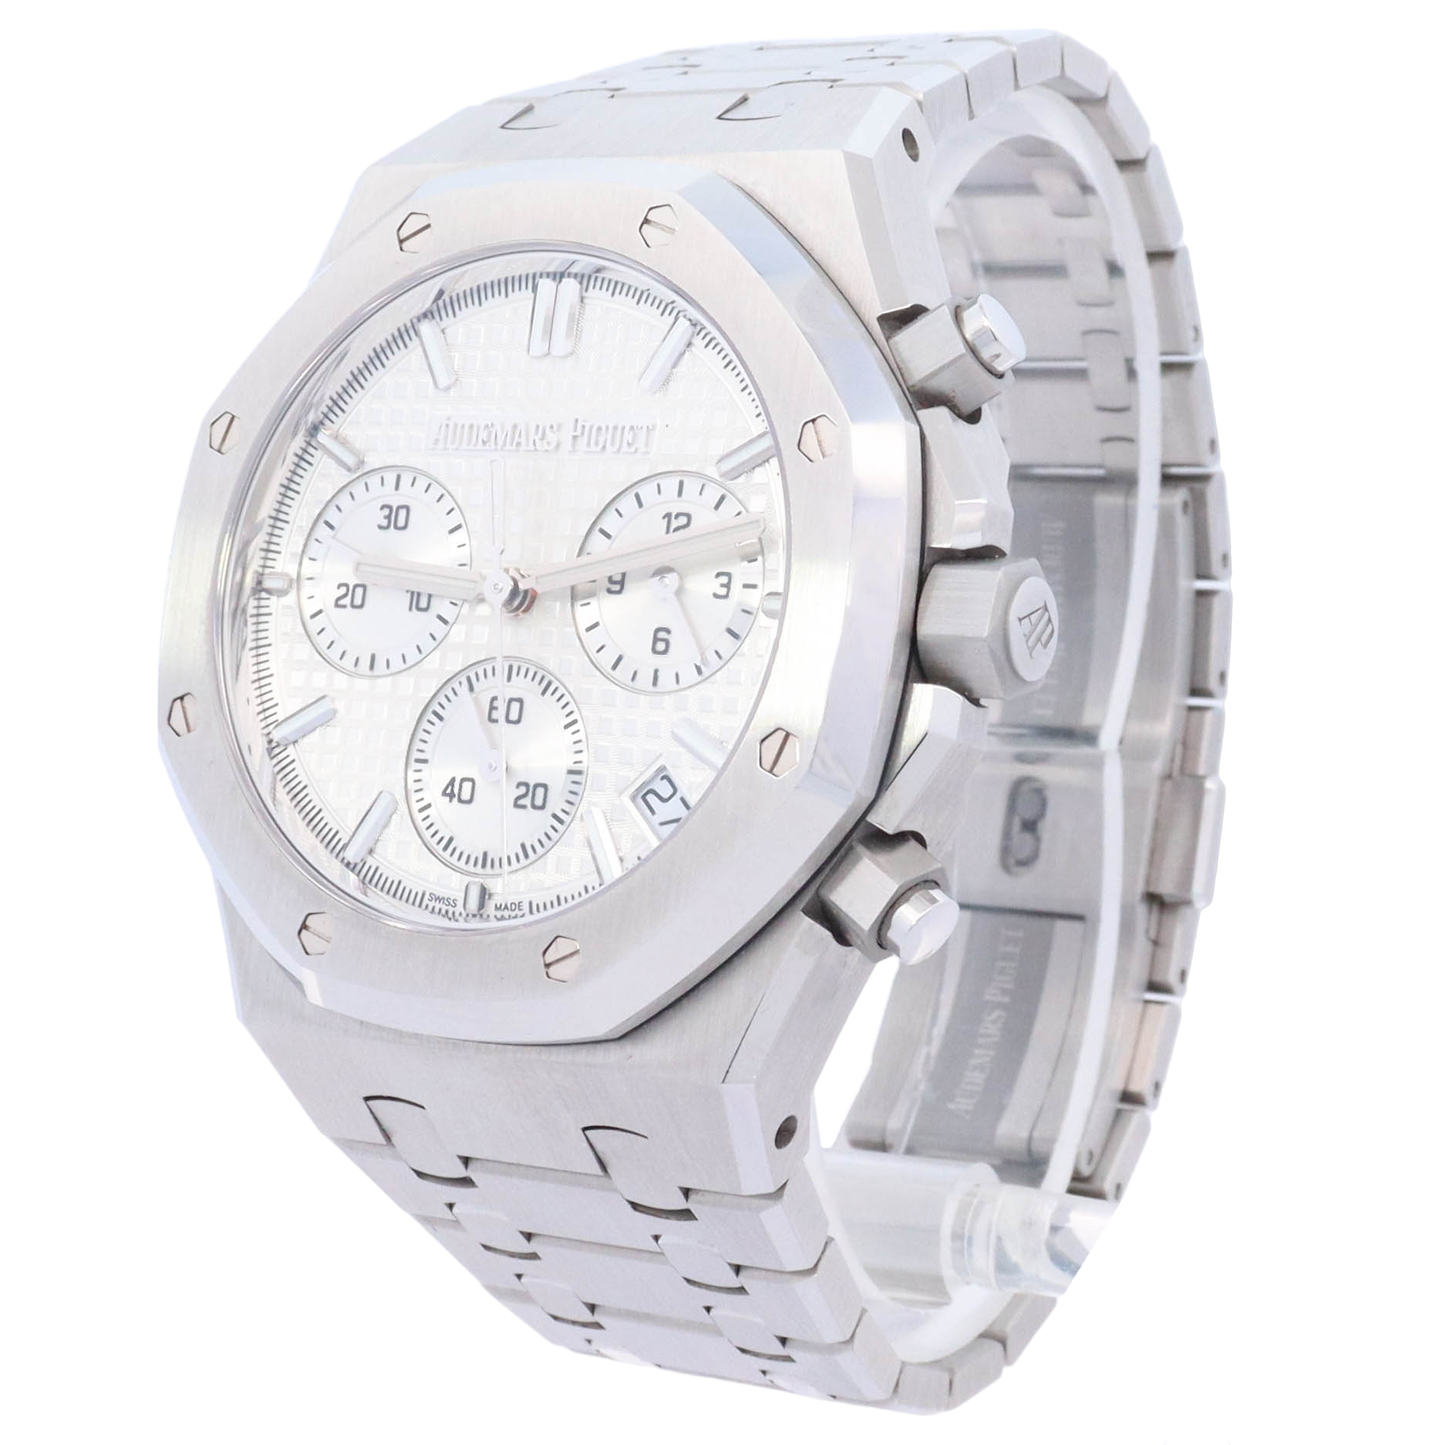 Audemars Piguet Royal Oak "50th Anniversary" 41mm White Chronograph Dial Watch Reference# 26240ST.OO.1320ST.03 - Happy Jewelers Fine Jewelry Lifetime Warranty